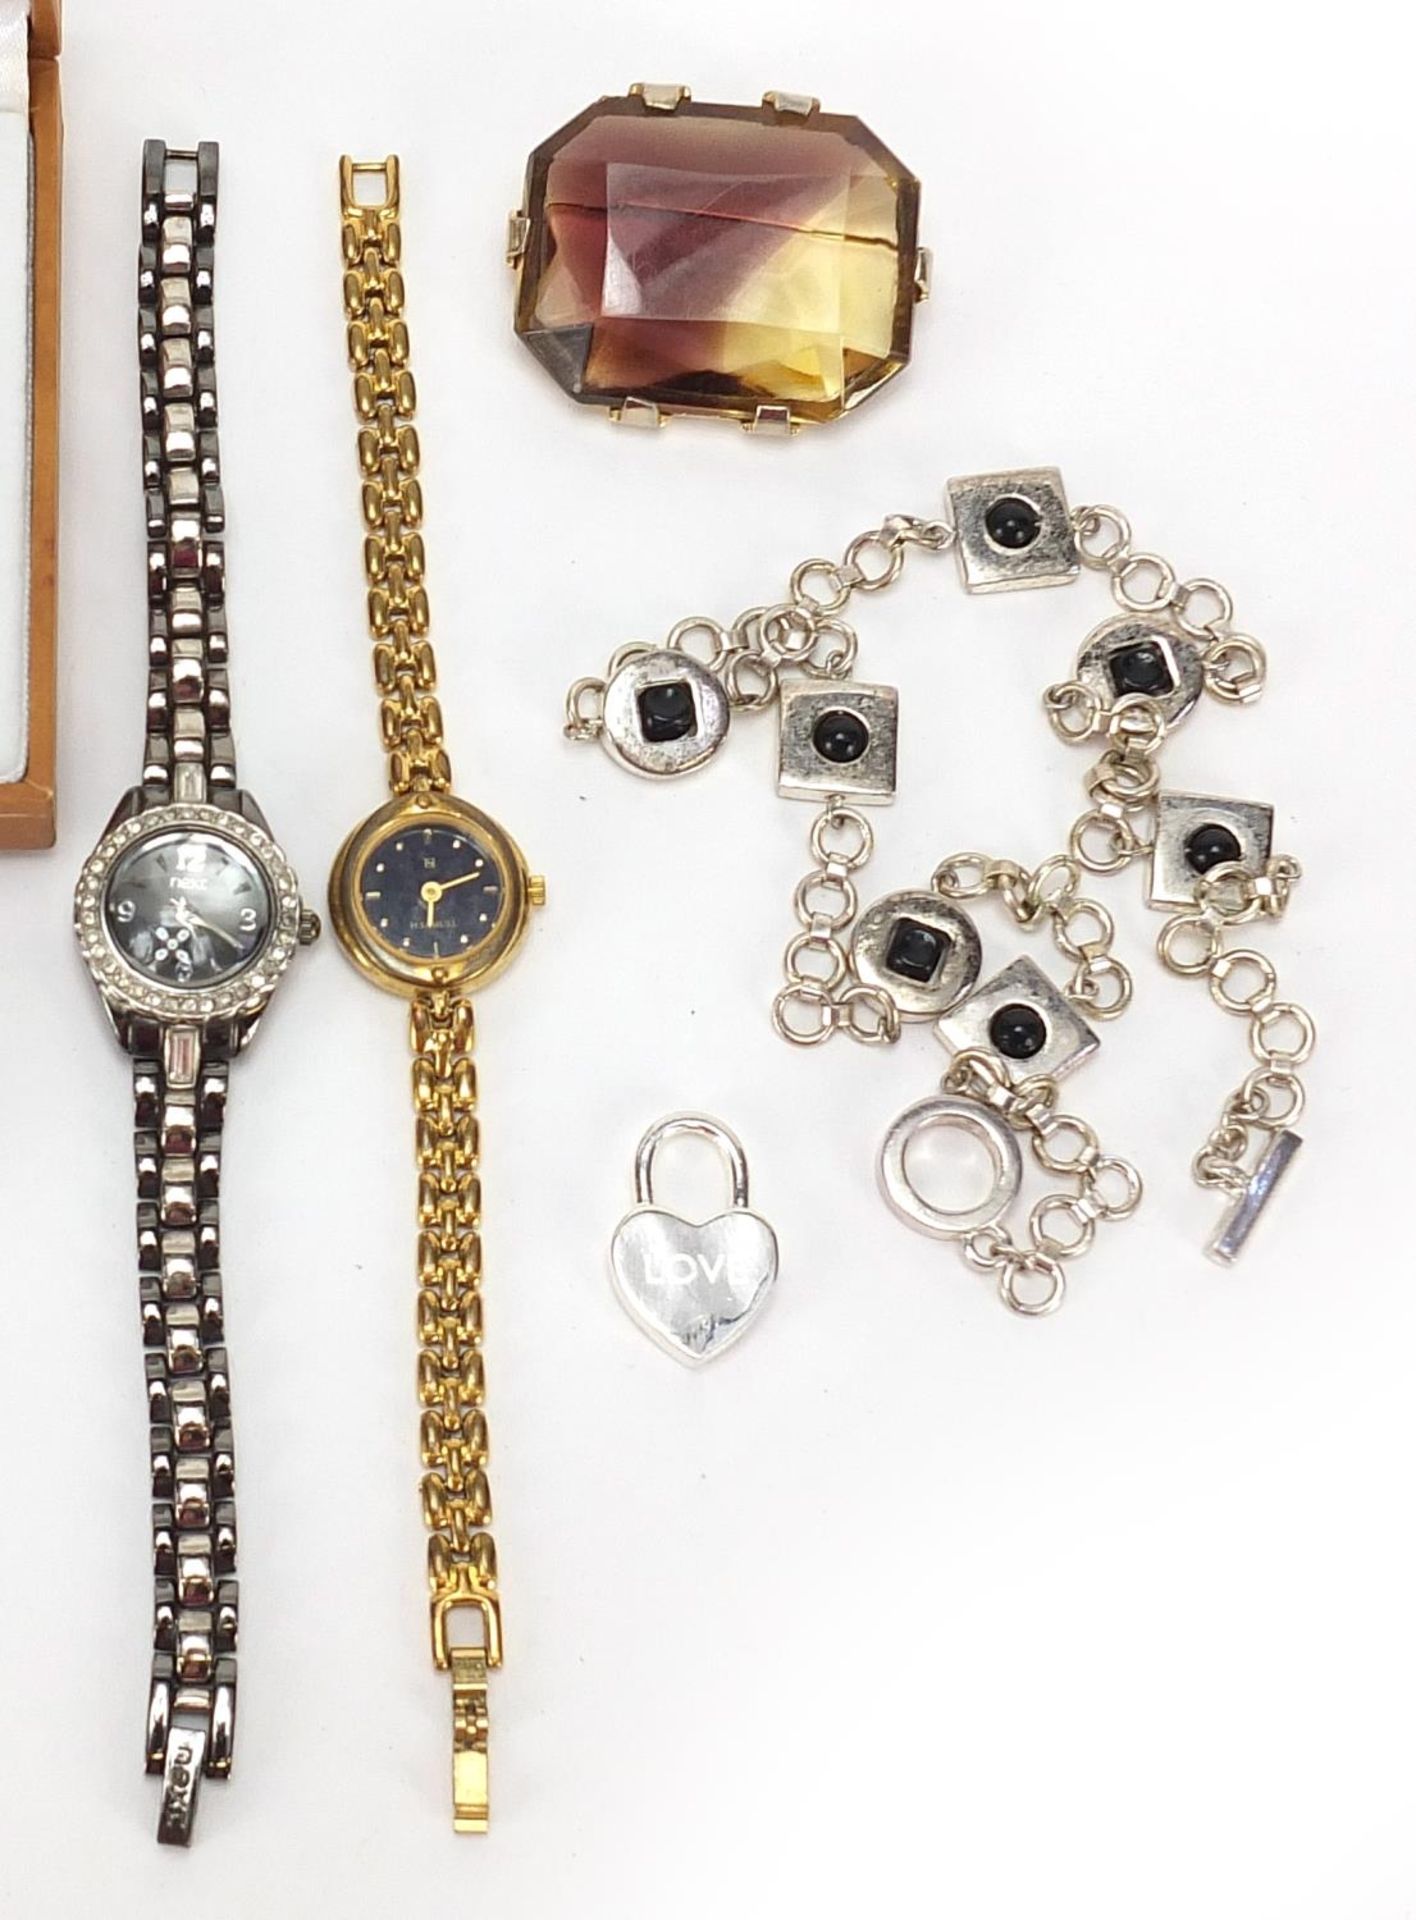 Vintage and later jewellery including silver rings, silver and amber pendant, vintage wristwatches - Image 3 of 4